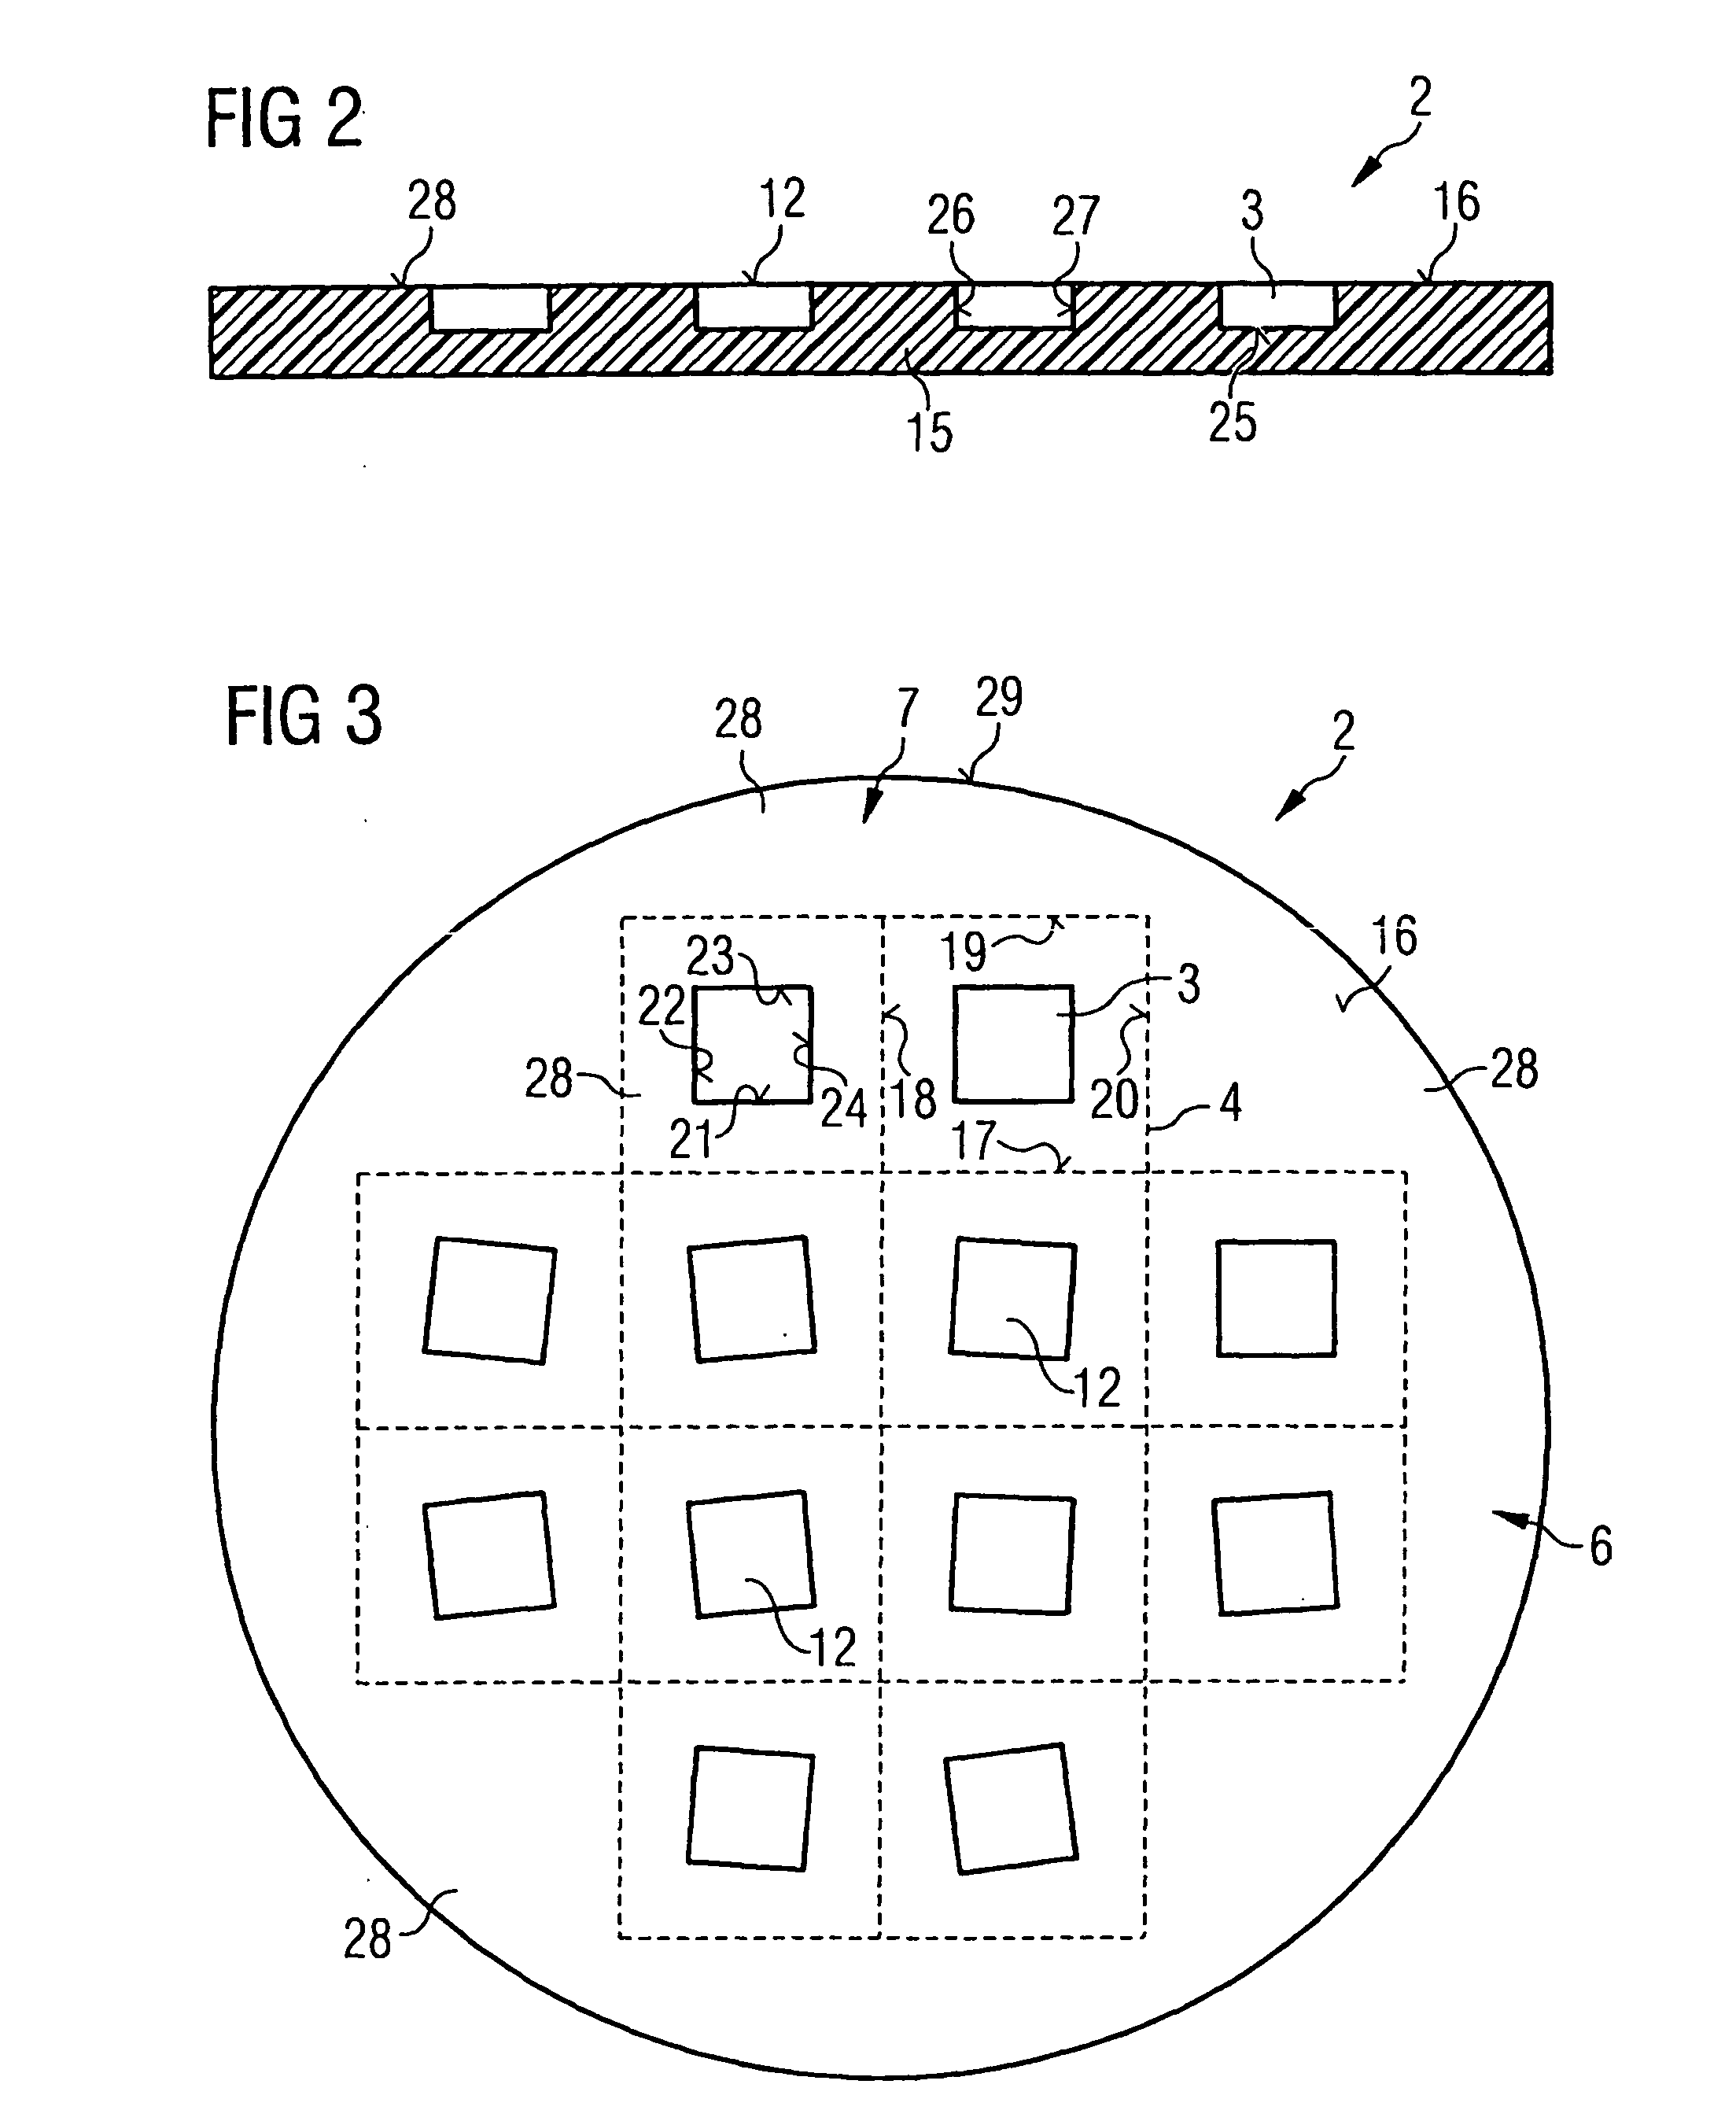 Method for Applying Rewiring to a Panel While Compensating for Position Errors of Semiconductor Chips in Component Positions of the Panel